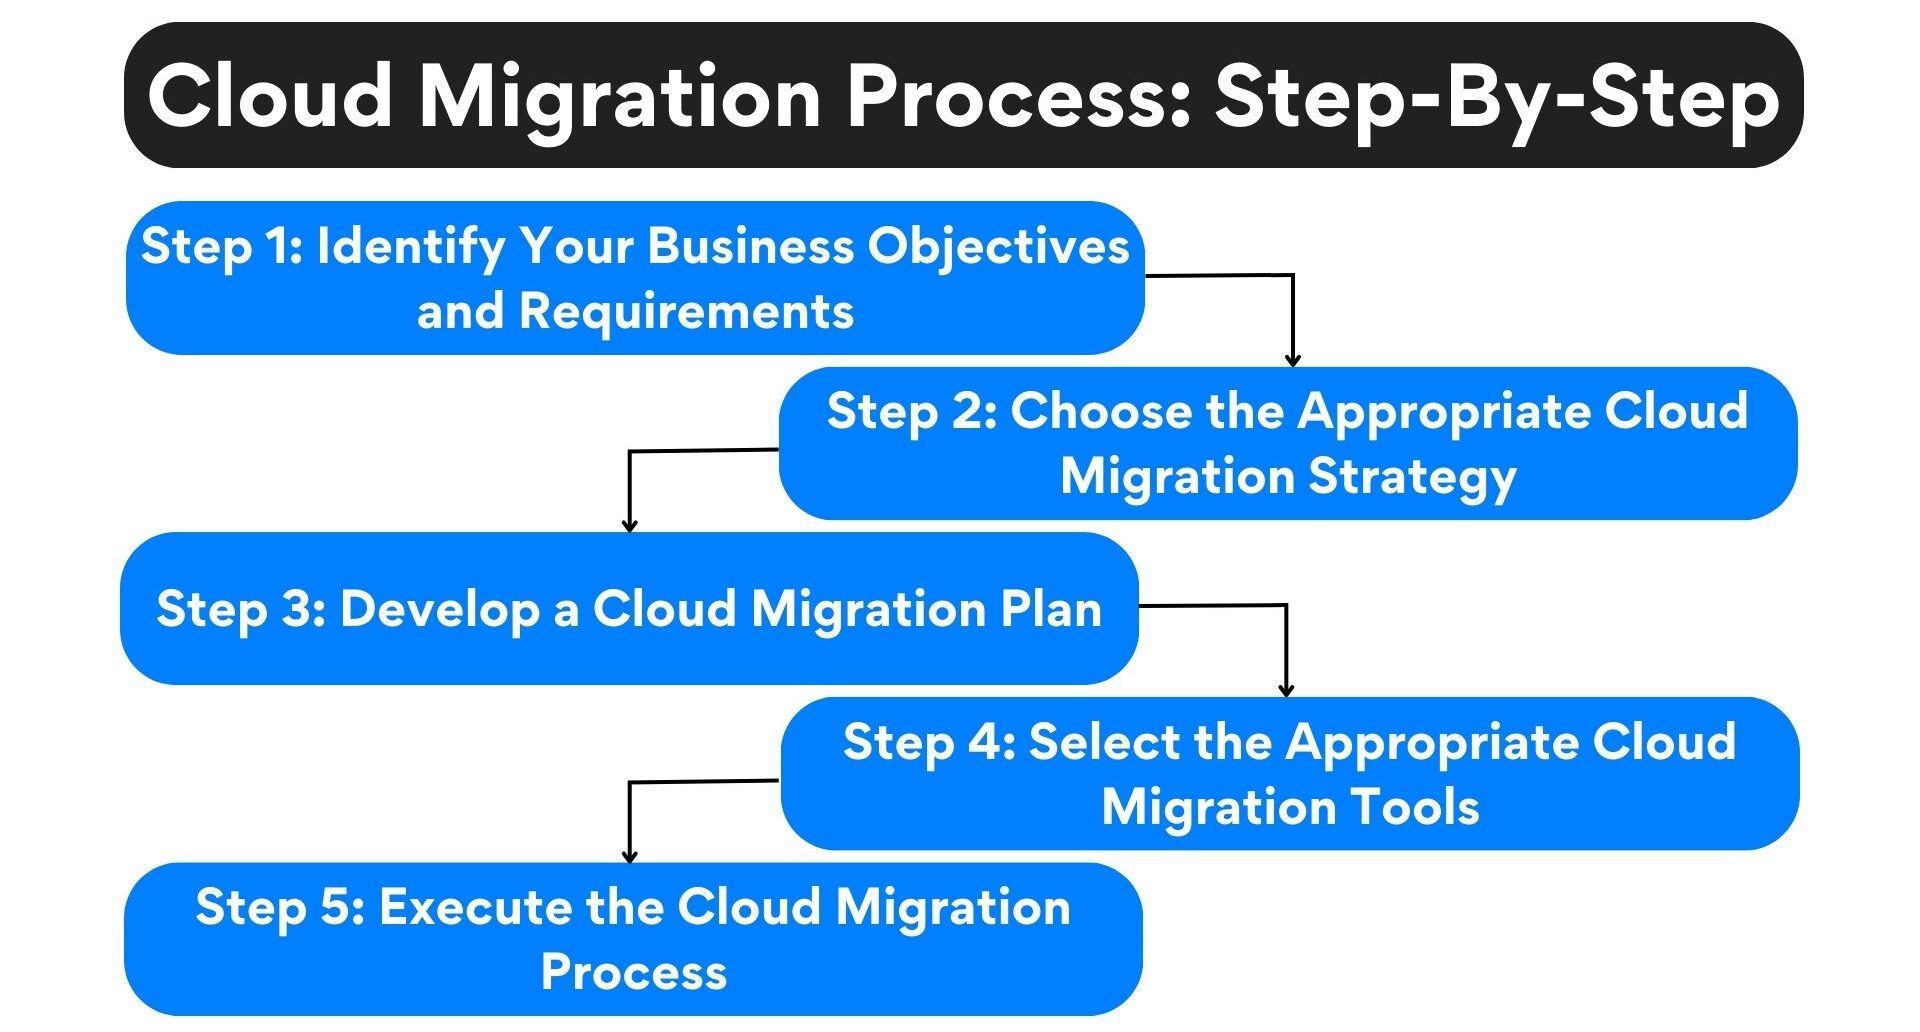 Cloud Migration Process Step-By-Step